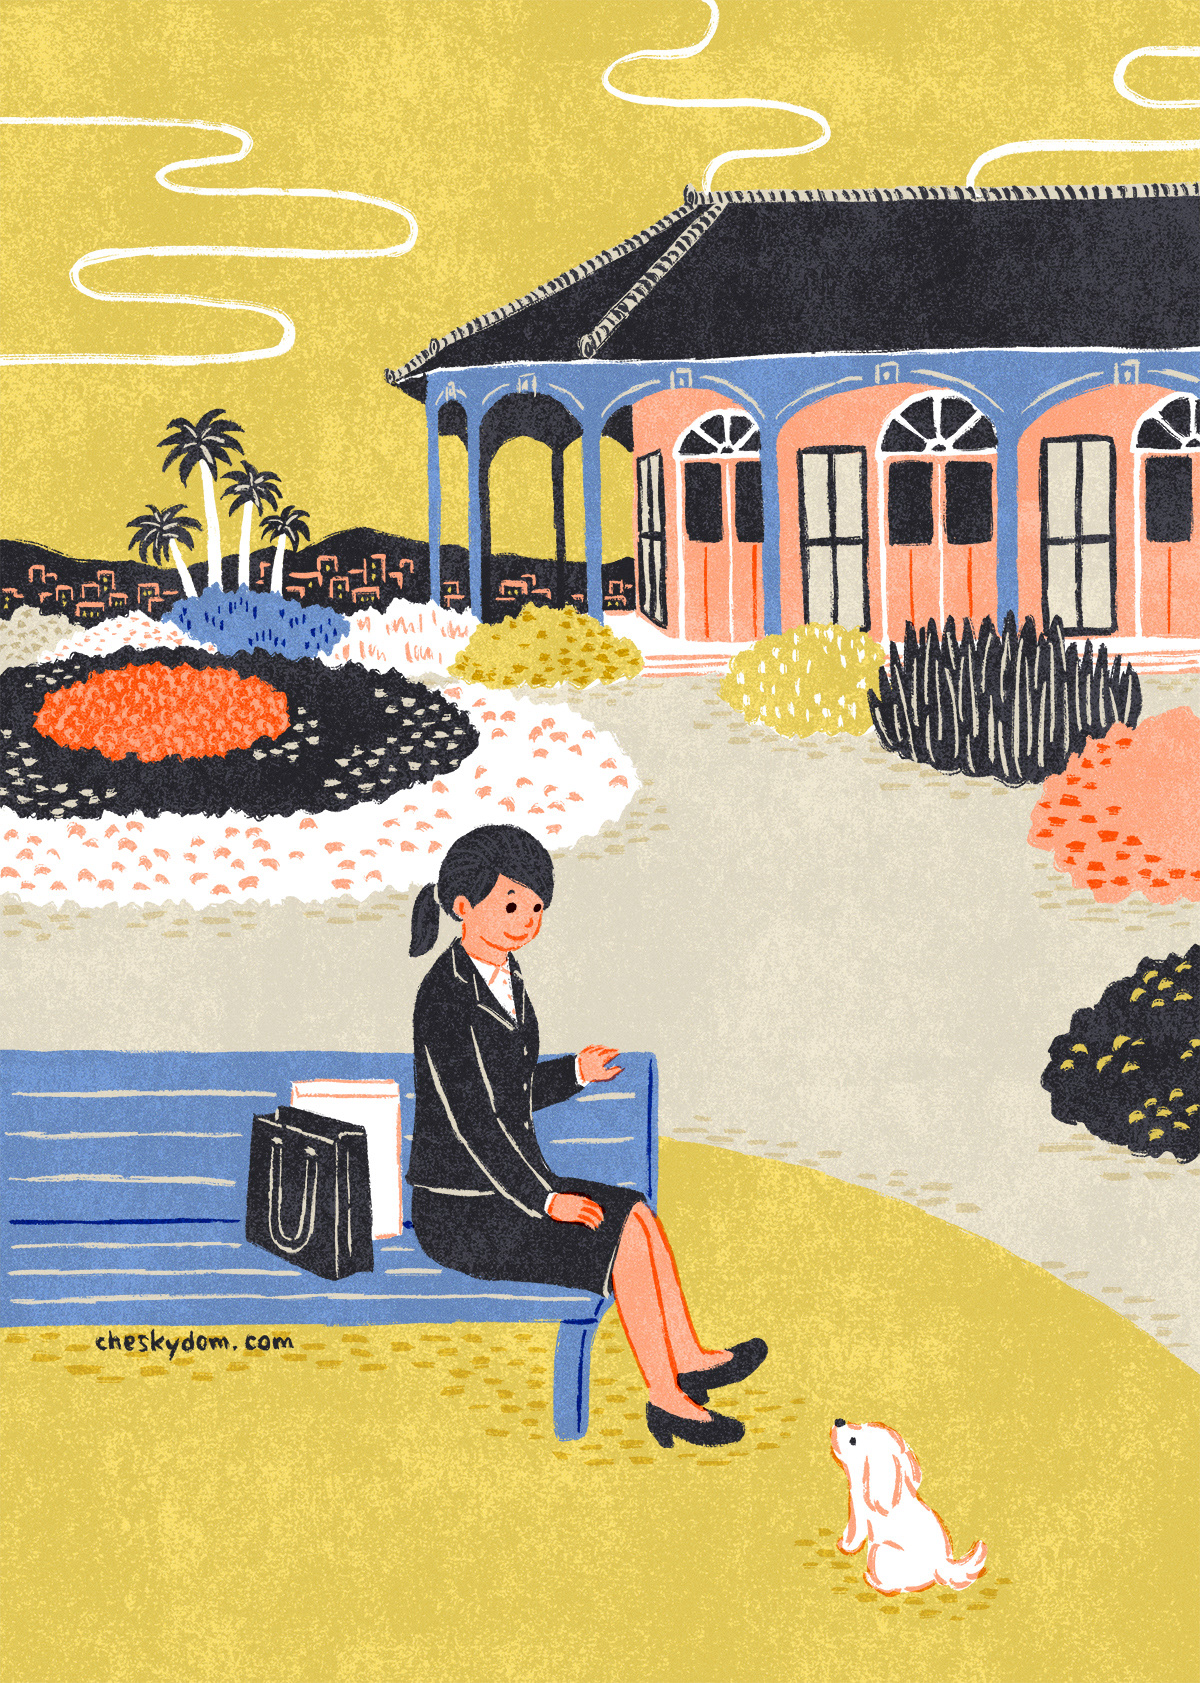 The illustration of a woman taking a rest at a famous garden in Japan.